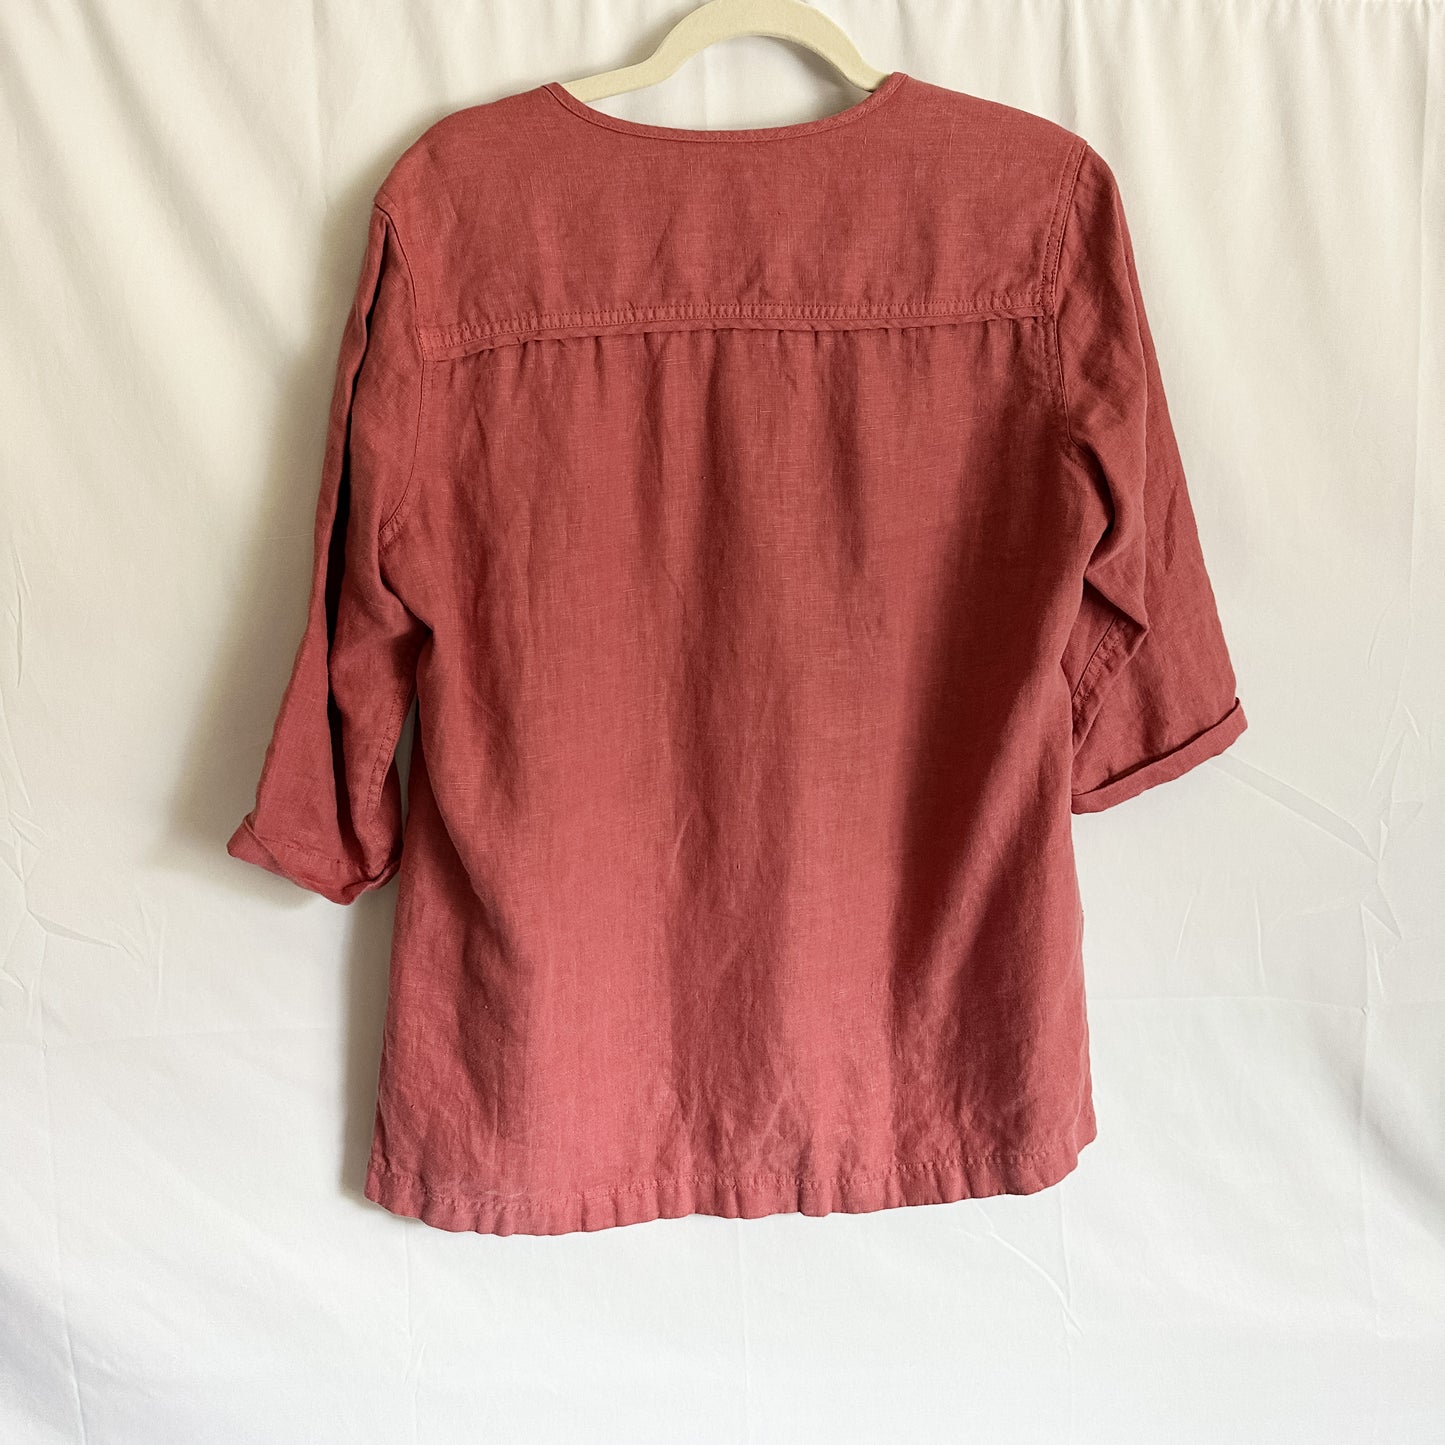 Poetry Linen Embroidered 3/4 Sleeve Top (fits M-L)